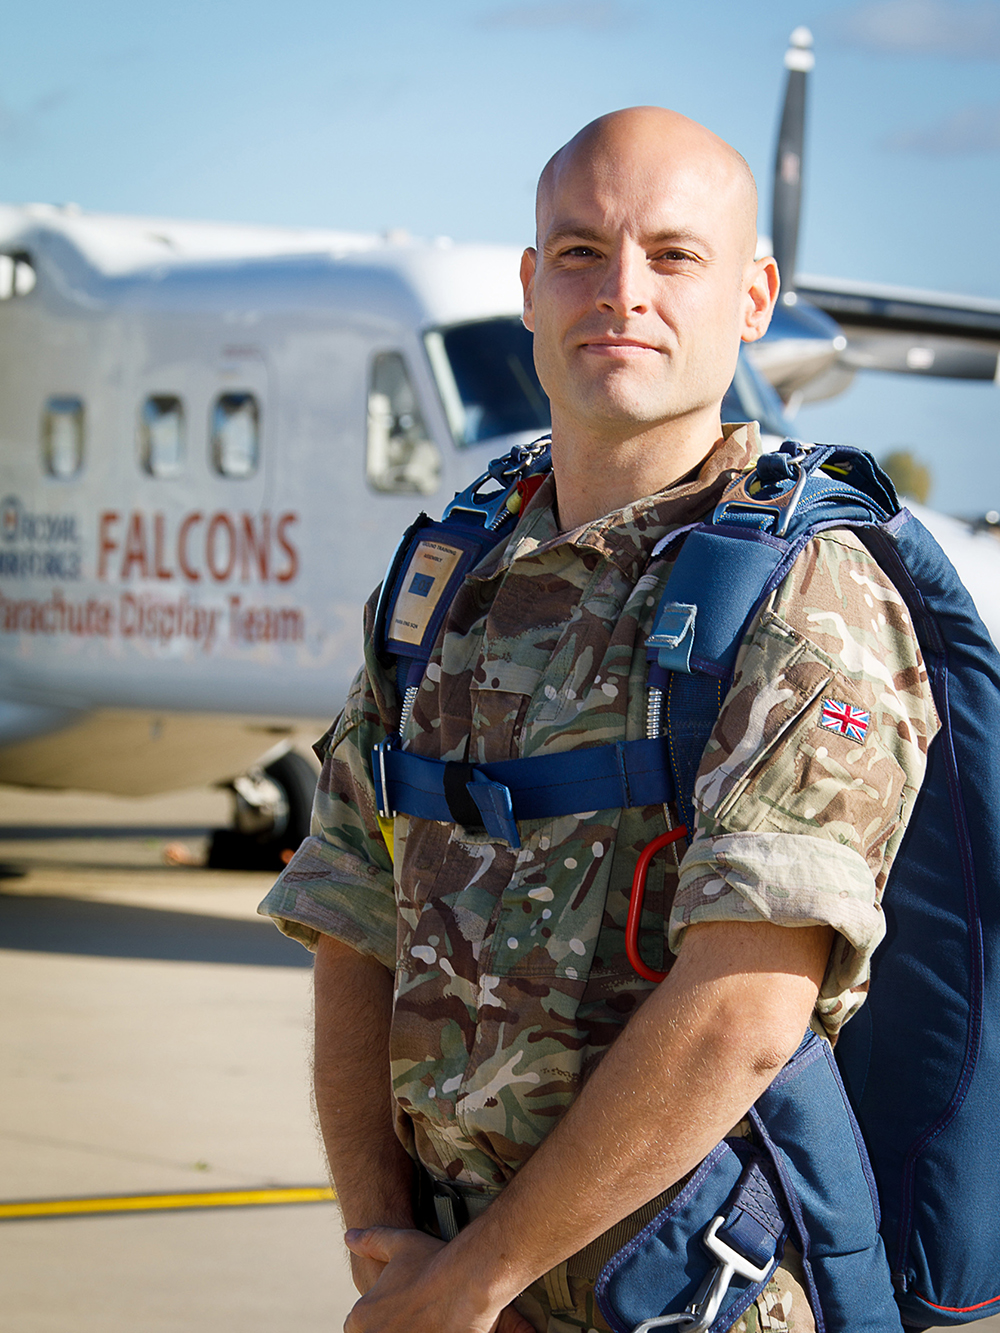 Selected to join the Team this year as the Deputy Officer Commanding RAF Falcons, Flight Lieutenant Ashley Grey-Smart